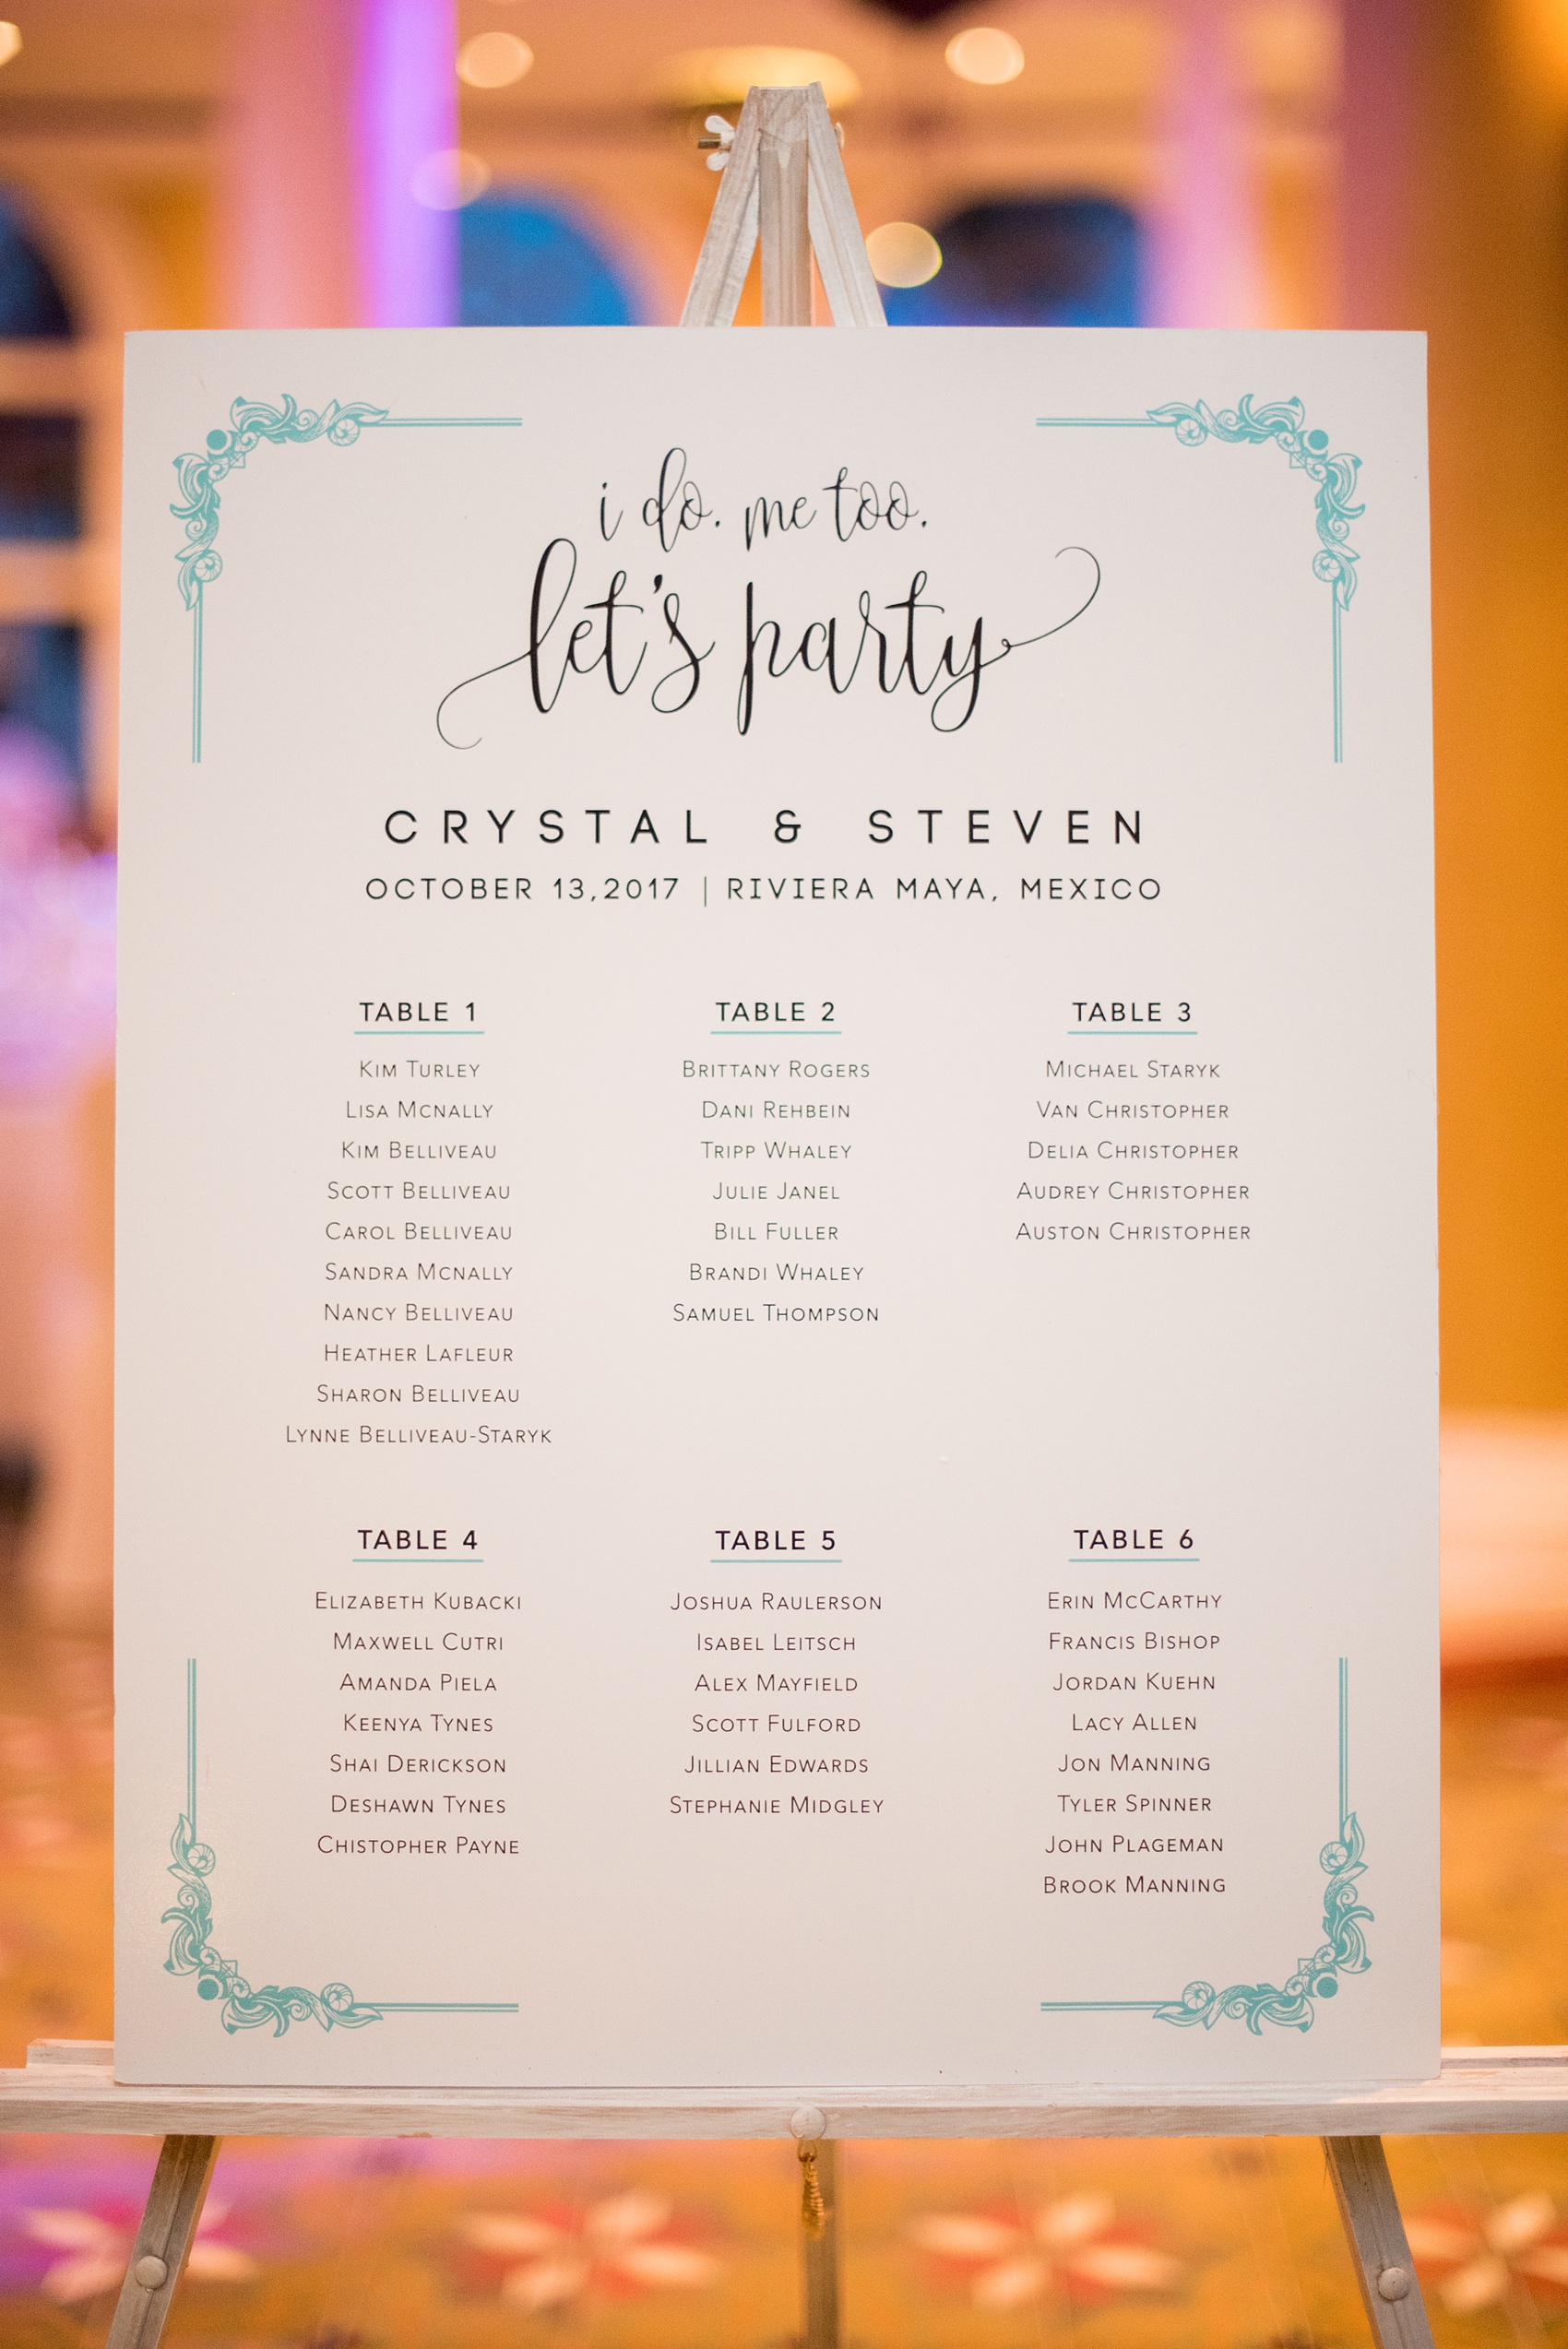 Mikkel Paige Photography photos from a wedding at Grand Paraiso, Mexico, Playa del Carmen Iberostar resort. Picture of the seating artistic chart for the reception.